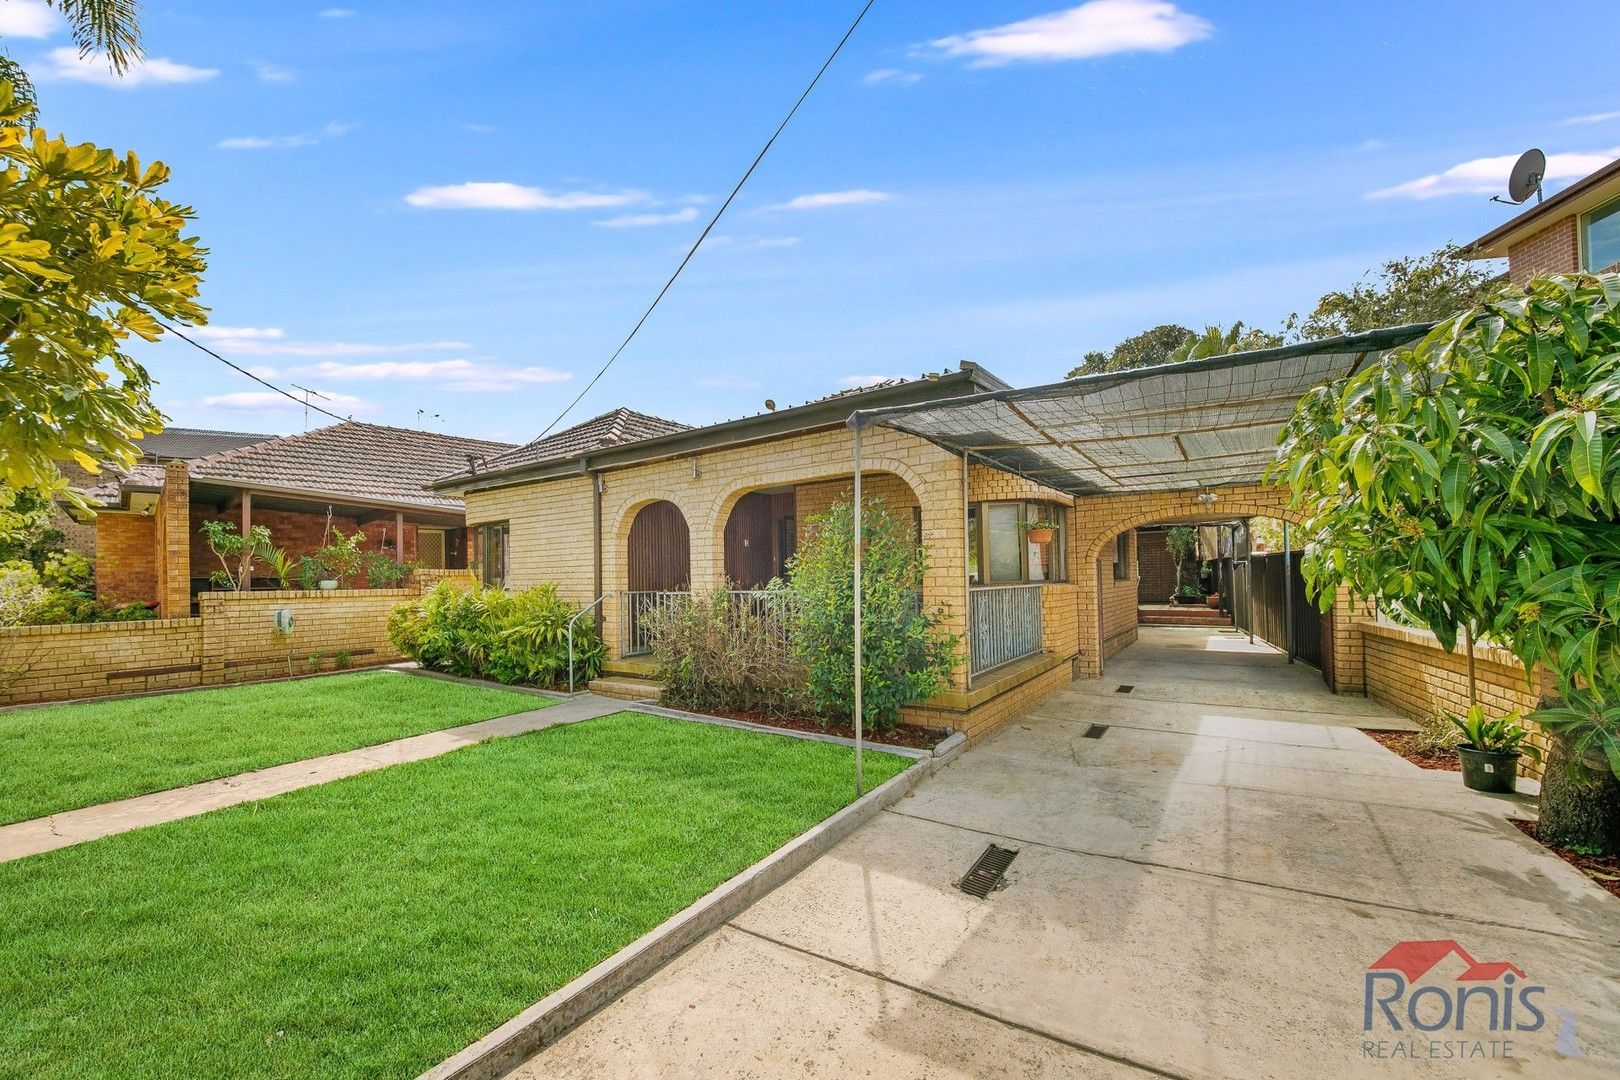 13 Weigand Ave, Bankstown NSW 2200, Image 0